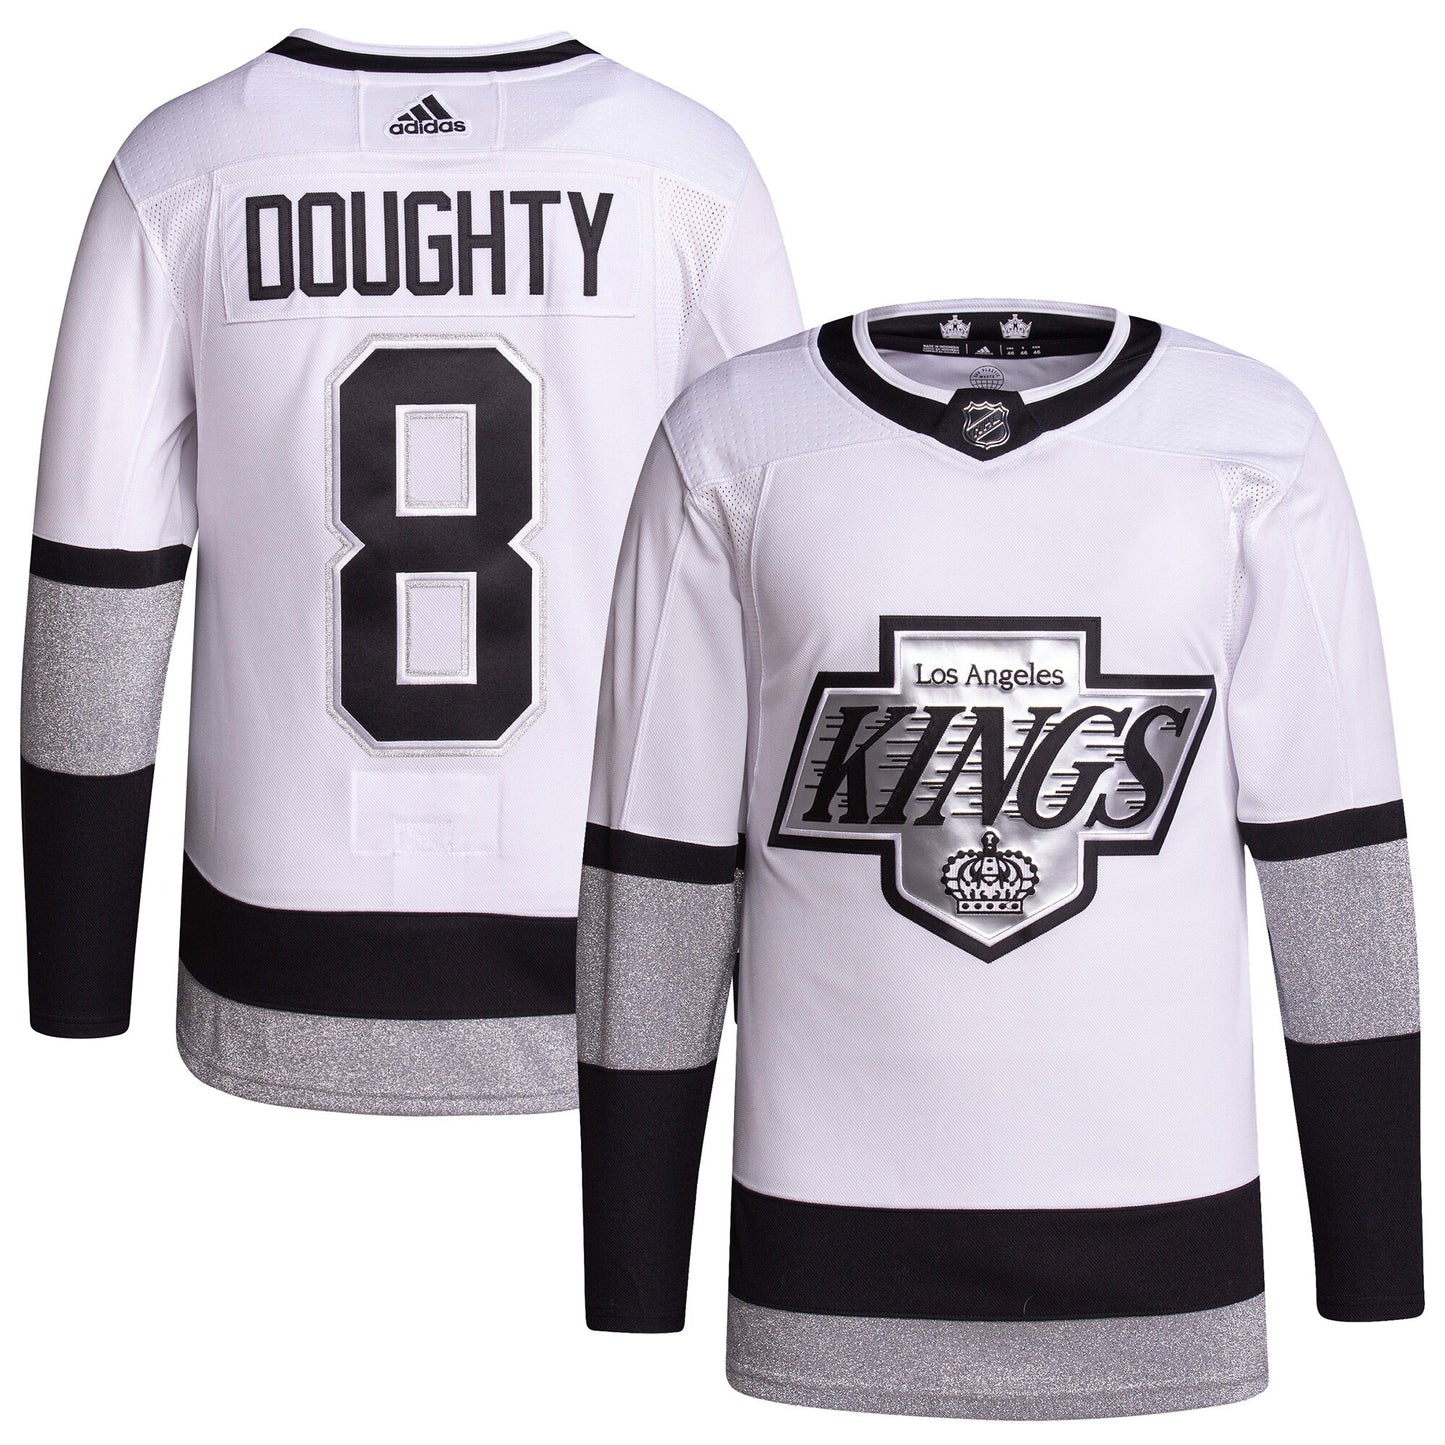 Drew Doughty Los Angeles Kings adidas Alternate Primegreen Authentic Pro Player Jersey - White